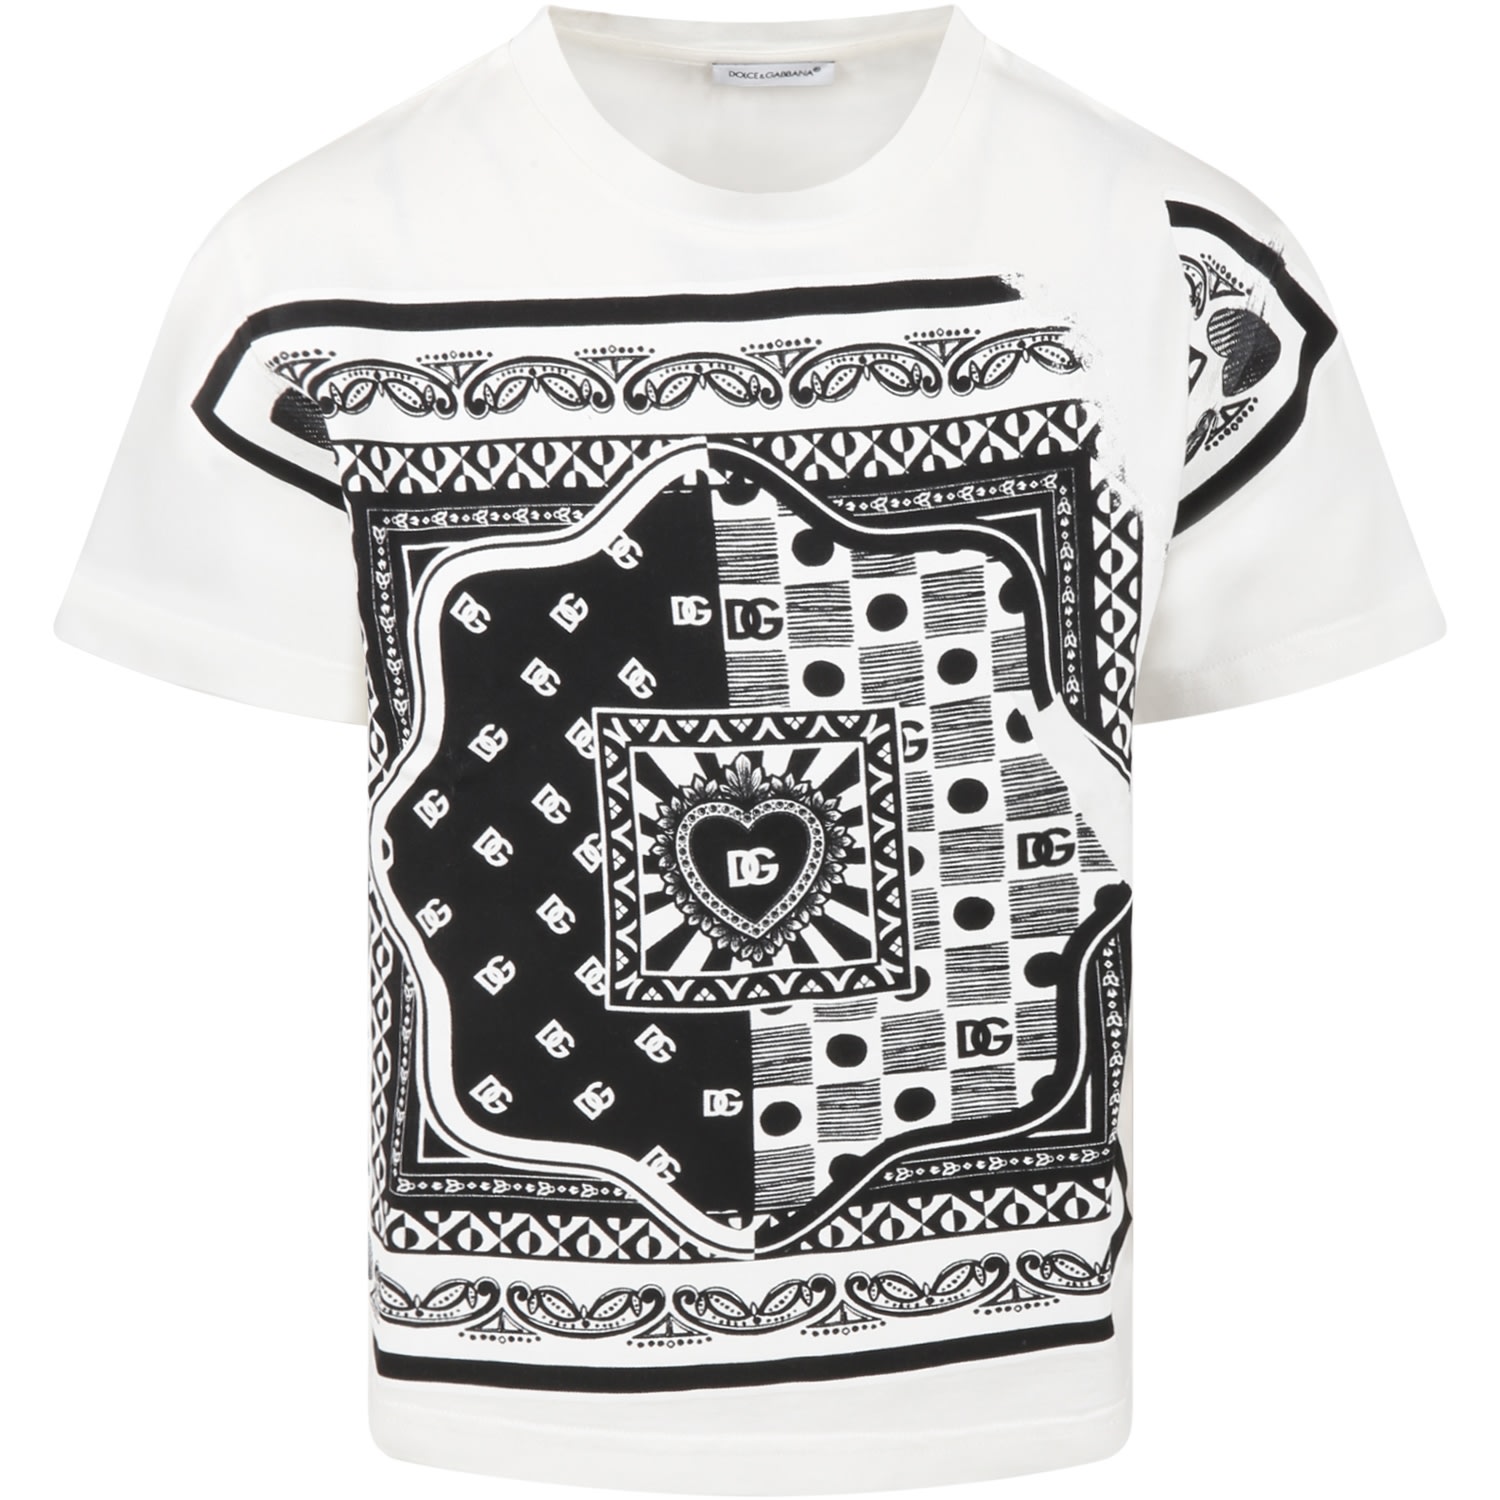 DOLCE & GABBANA WHITE T-SHIRT FOR KIDS WITH BLACK PRINT AND LOGO